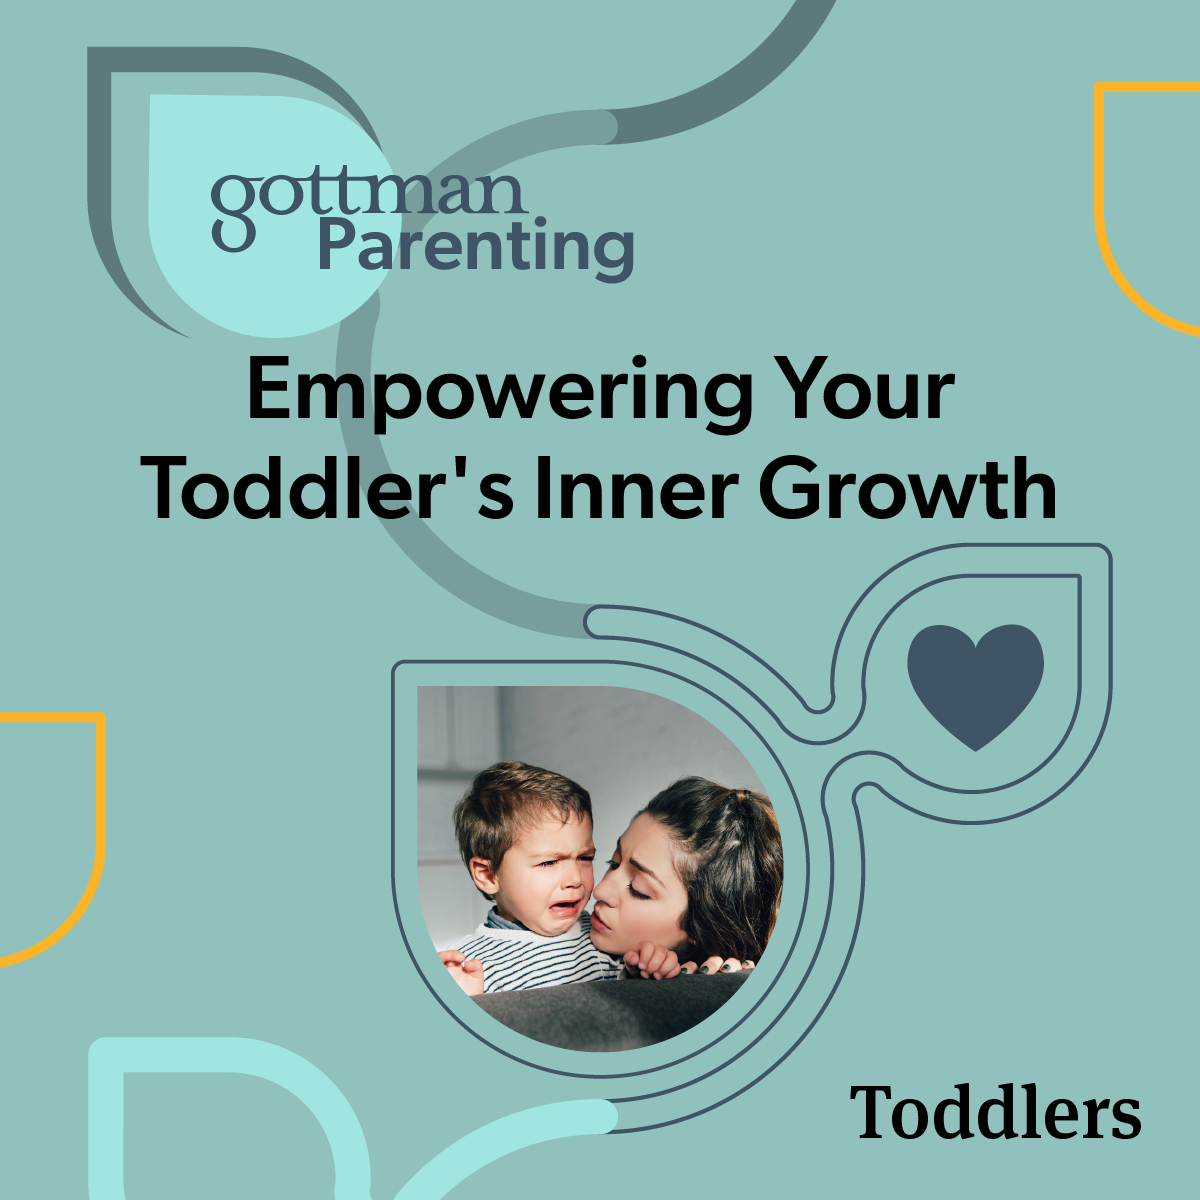 Gottman Parenting: Empowering Your Toddler's Inner Growth